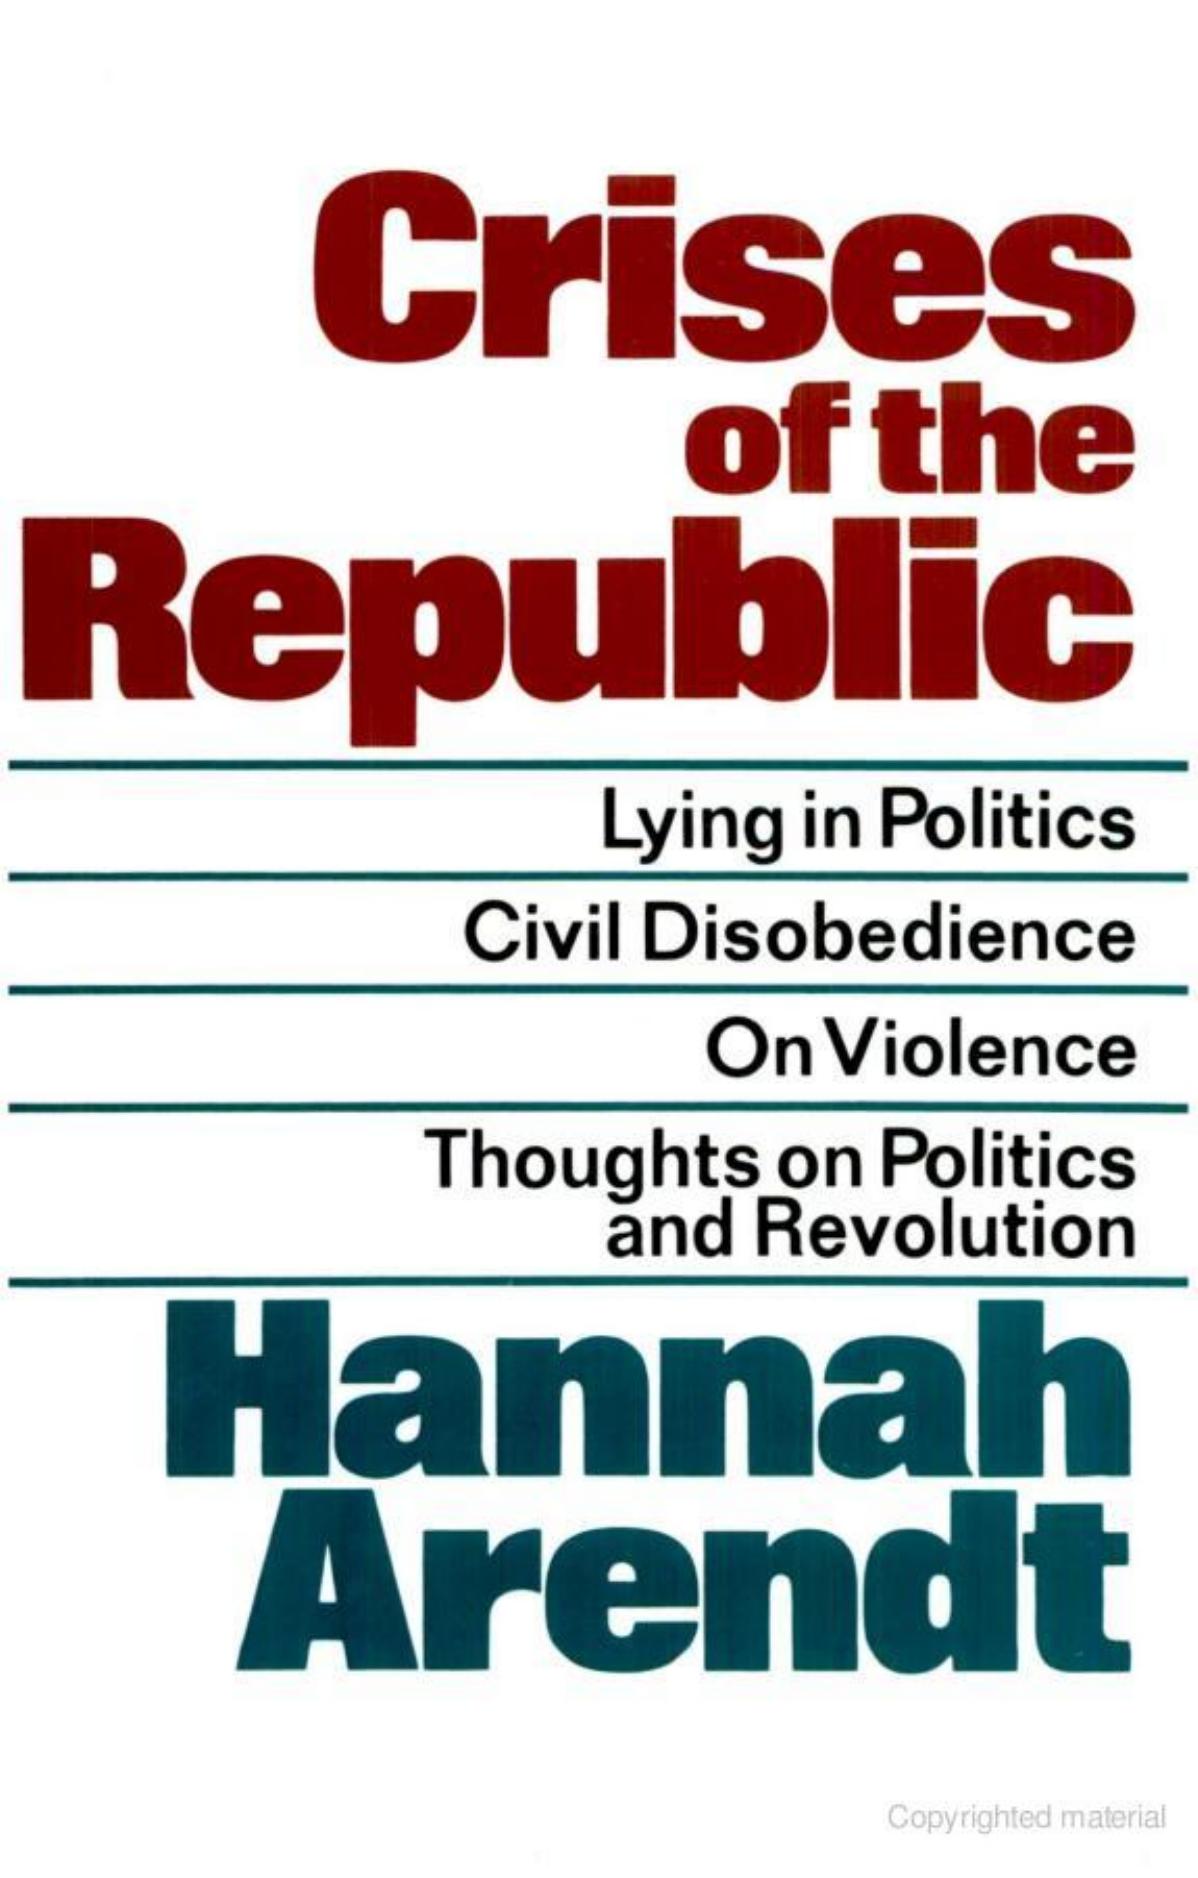 Crises of the Republic: Lying in Politics, Civil Disobedience on Violence, Thoughts on Politics, and Revolution